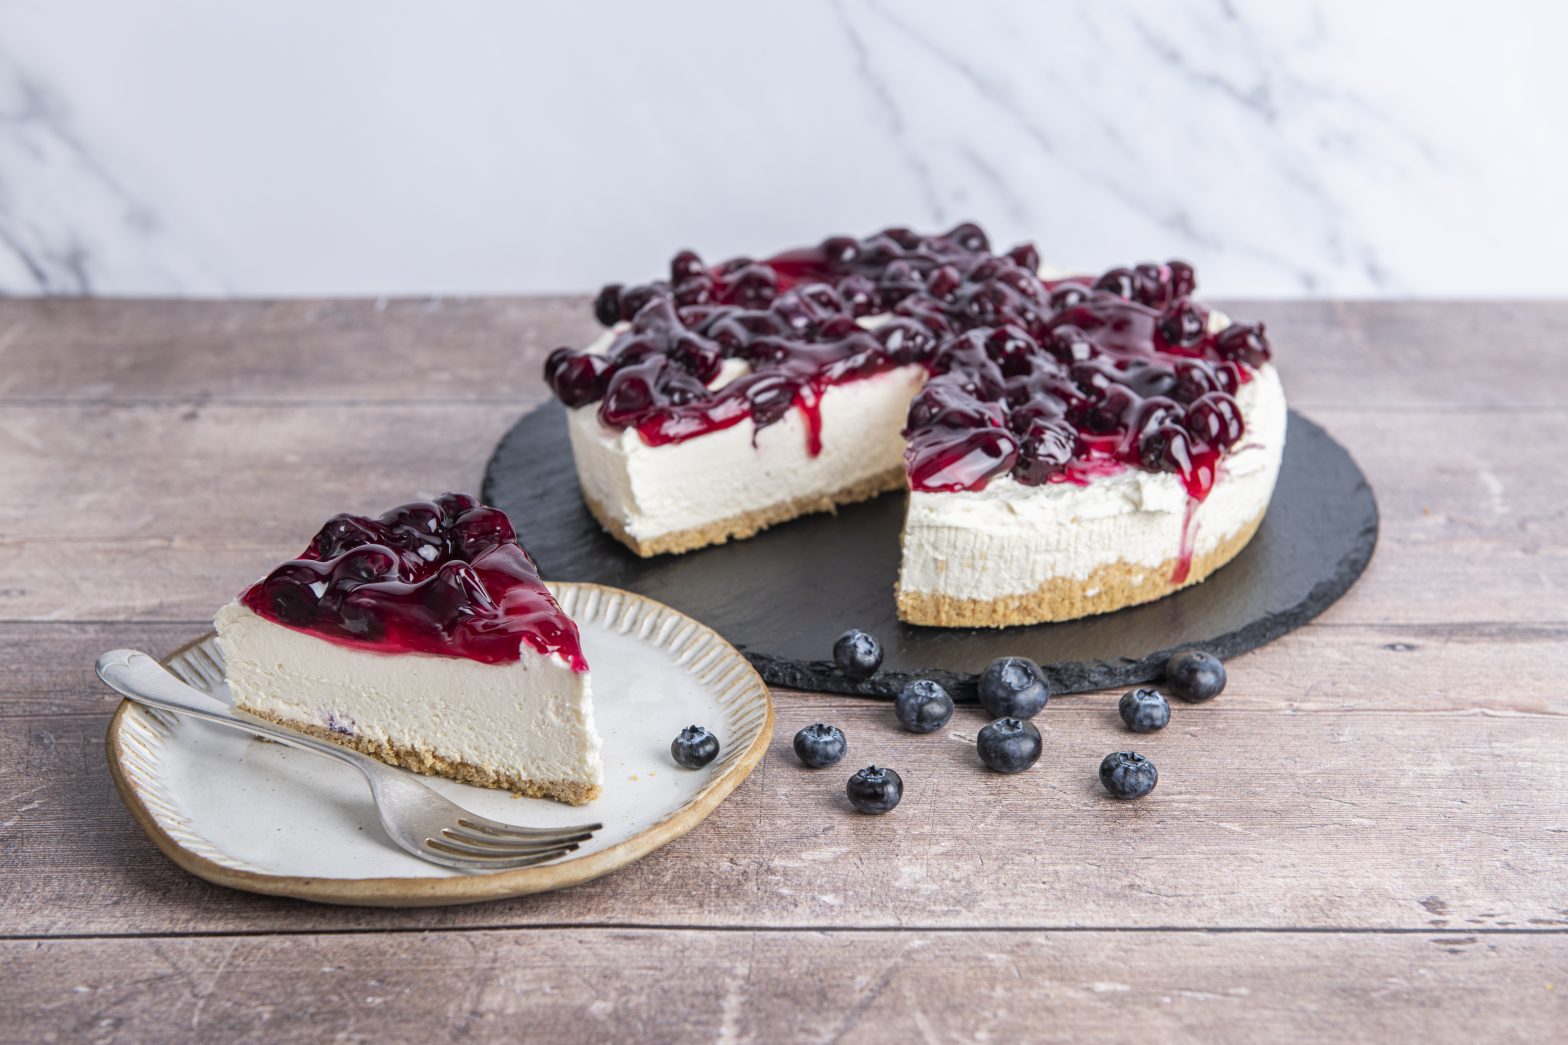 Continental Blueberry Cheesecake